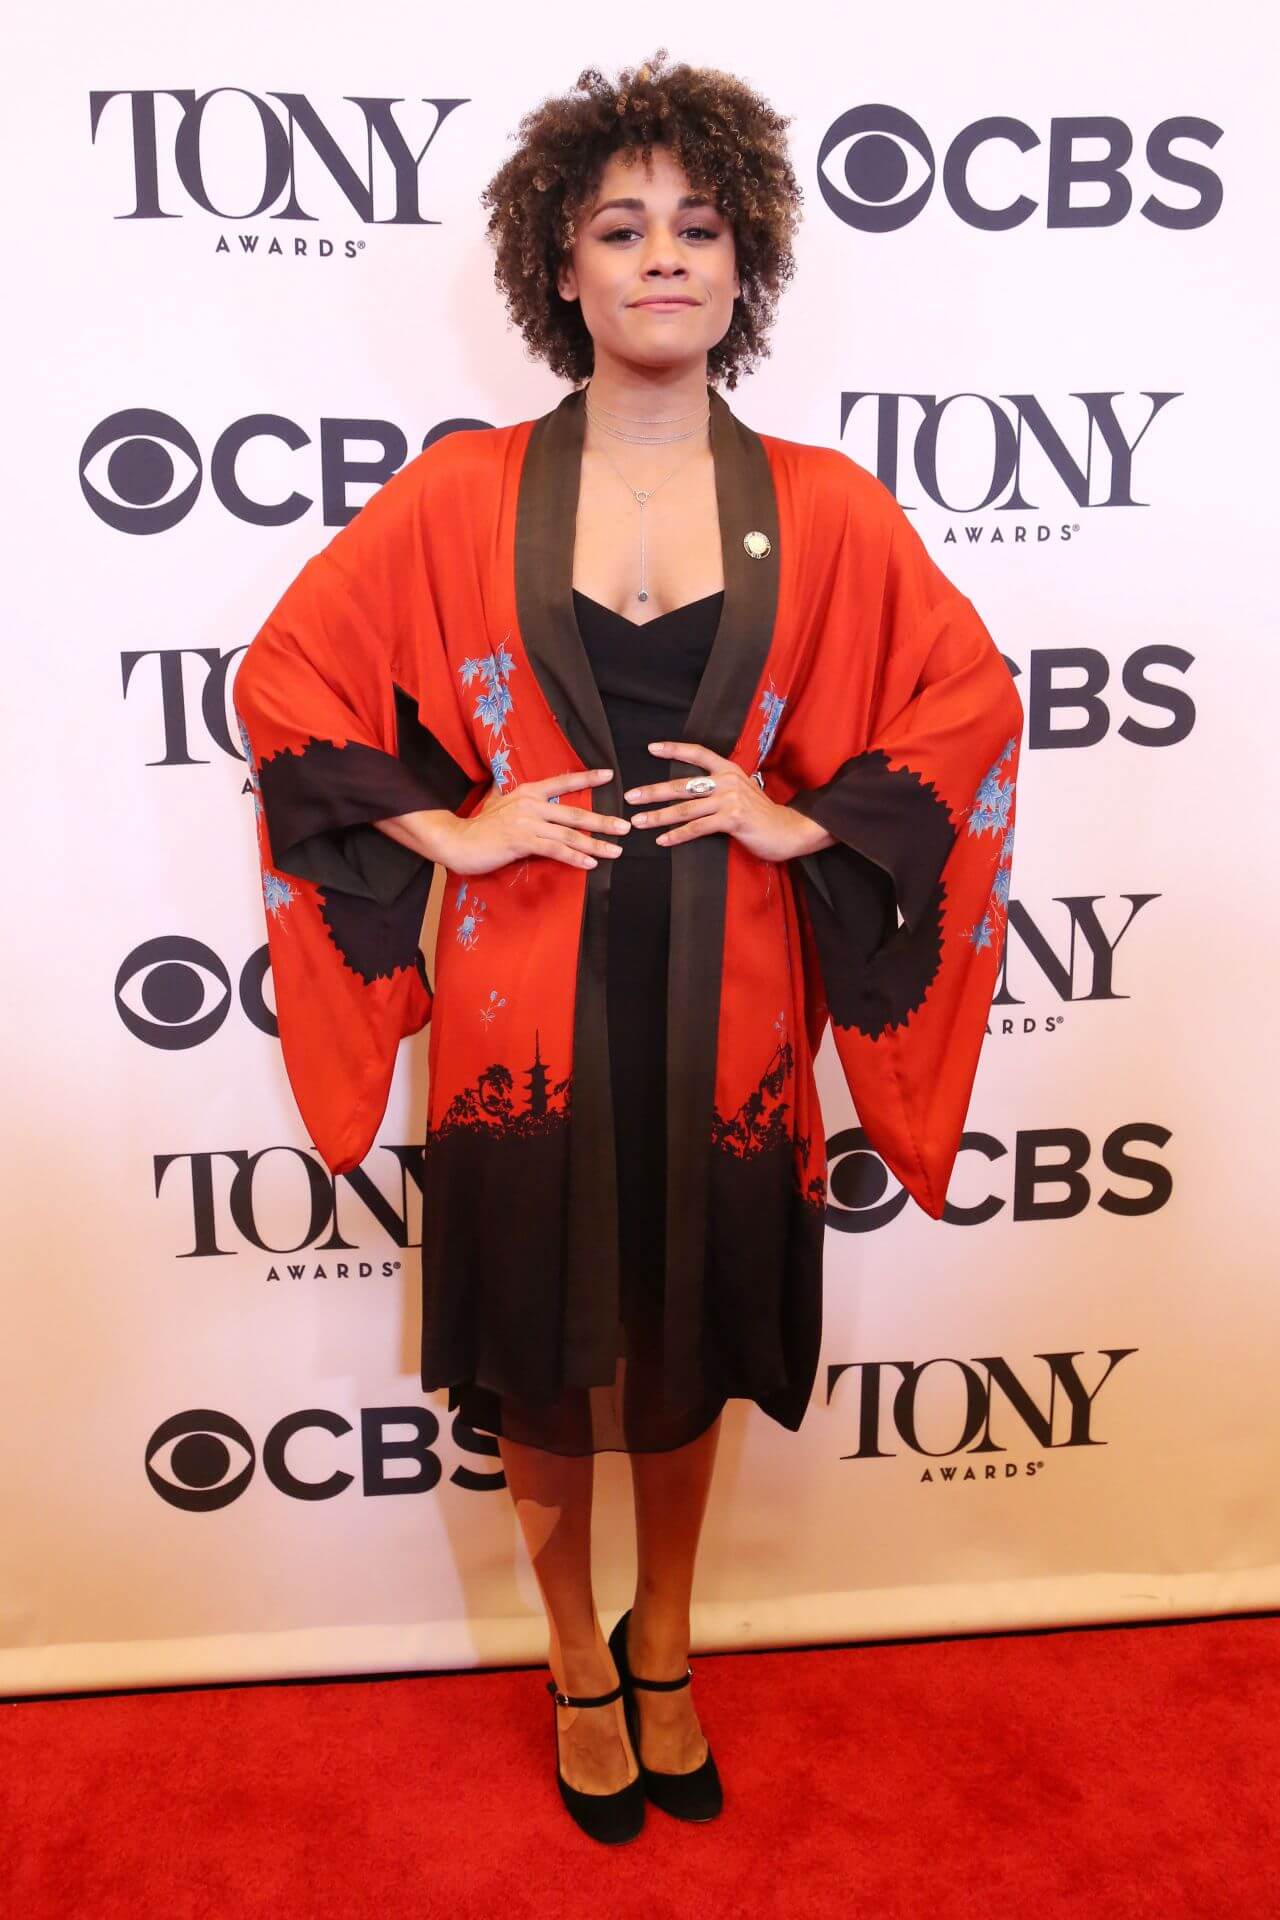 Ariana DeBose In Black Sheering One Piece With Orange Baggy Sleeves Shrug At Tony Awards Nominees Photocall